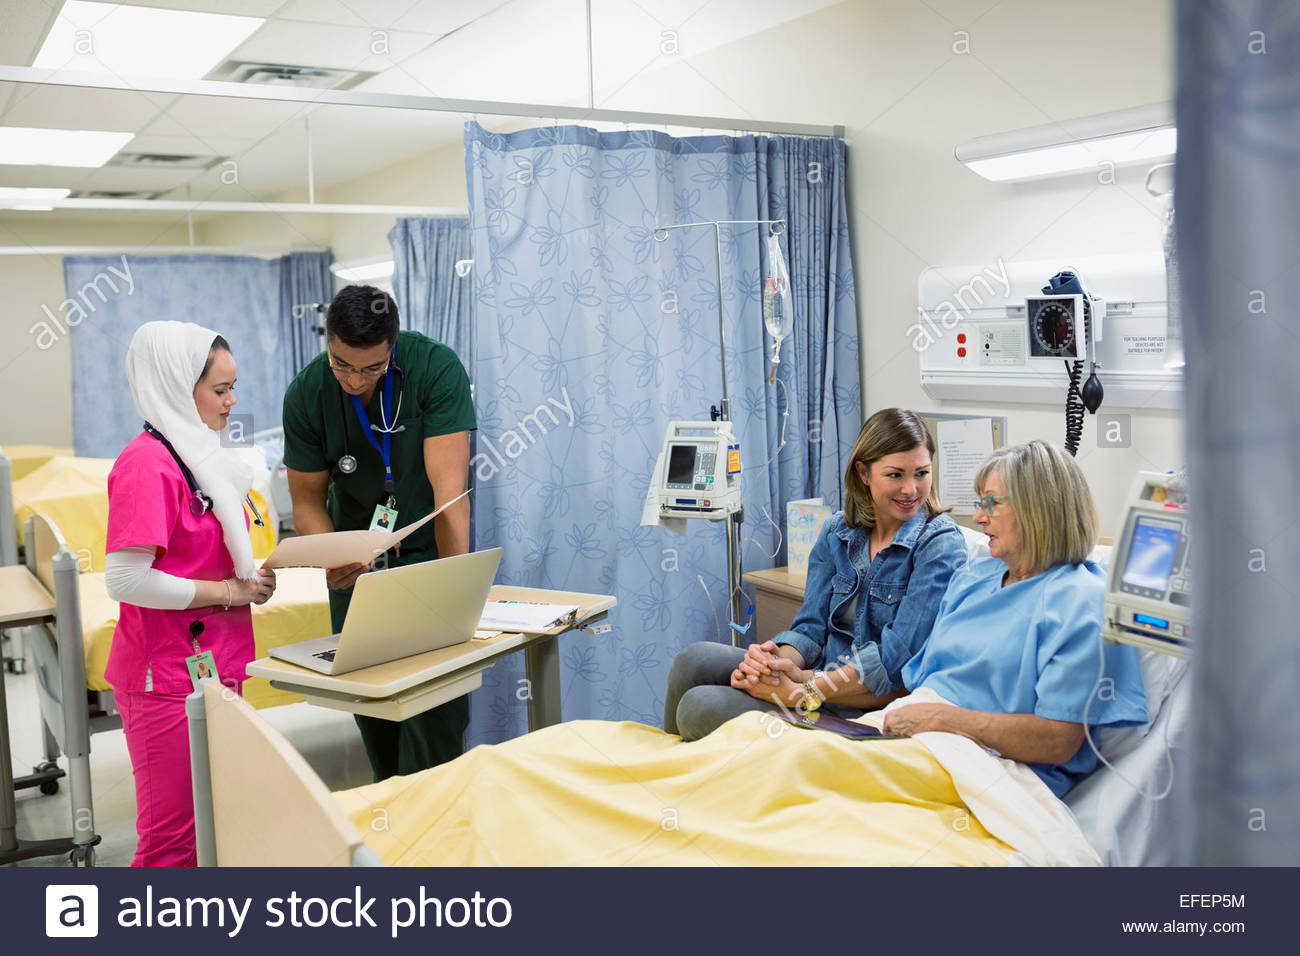 Nurses checking on patient in hospital bed Stock Photo